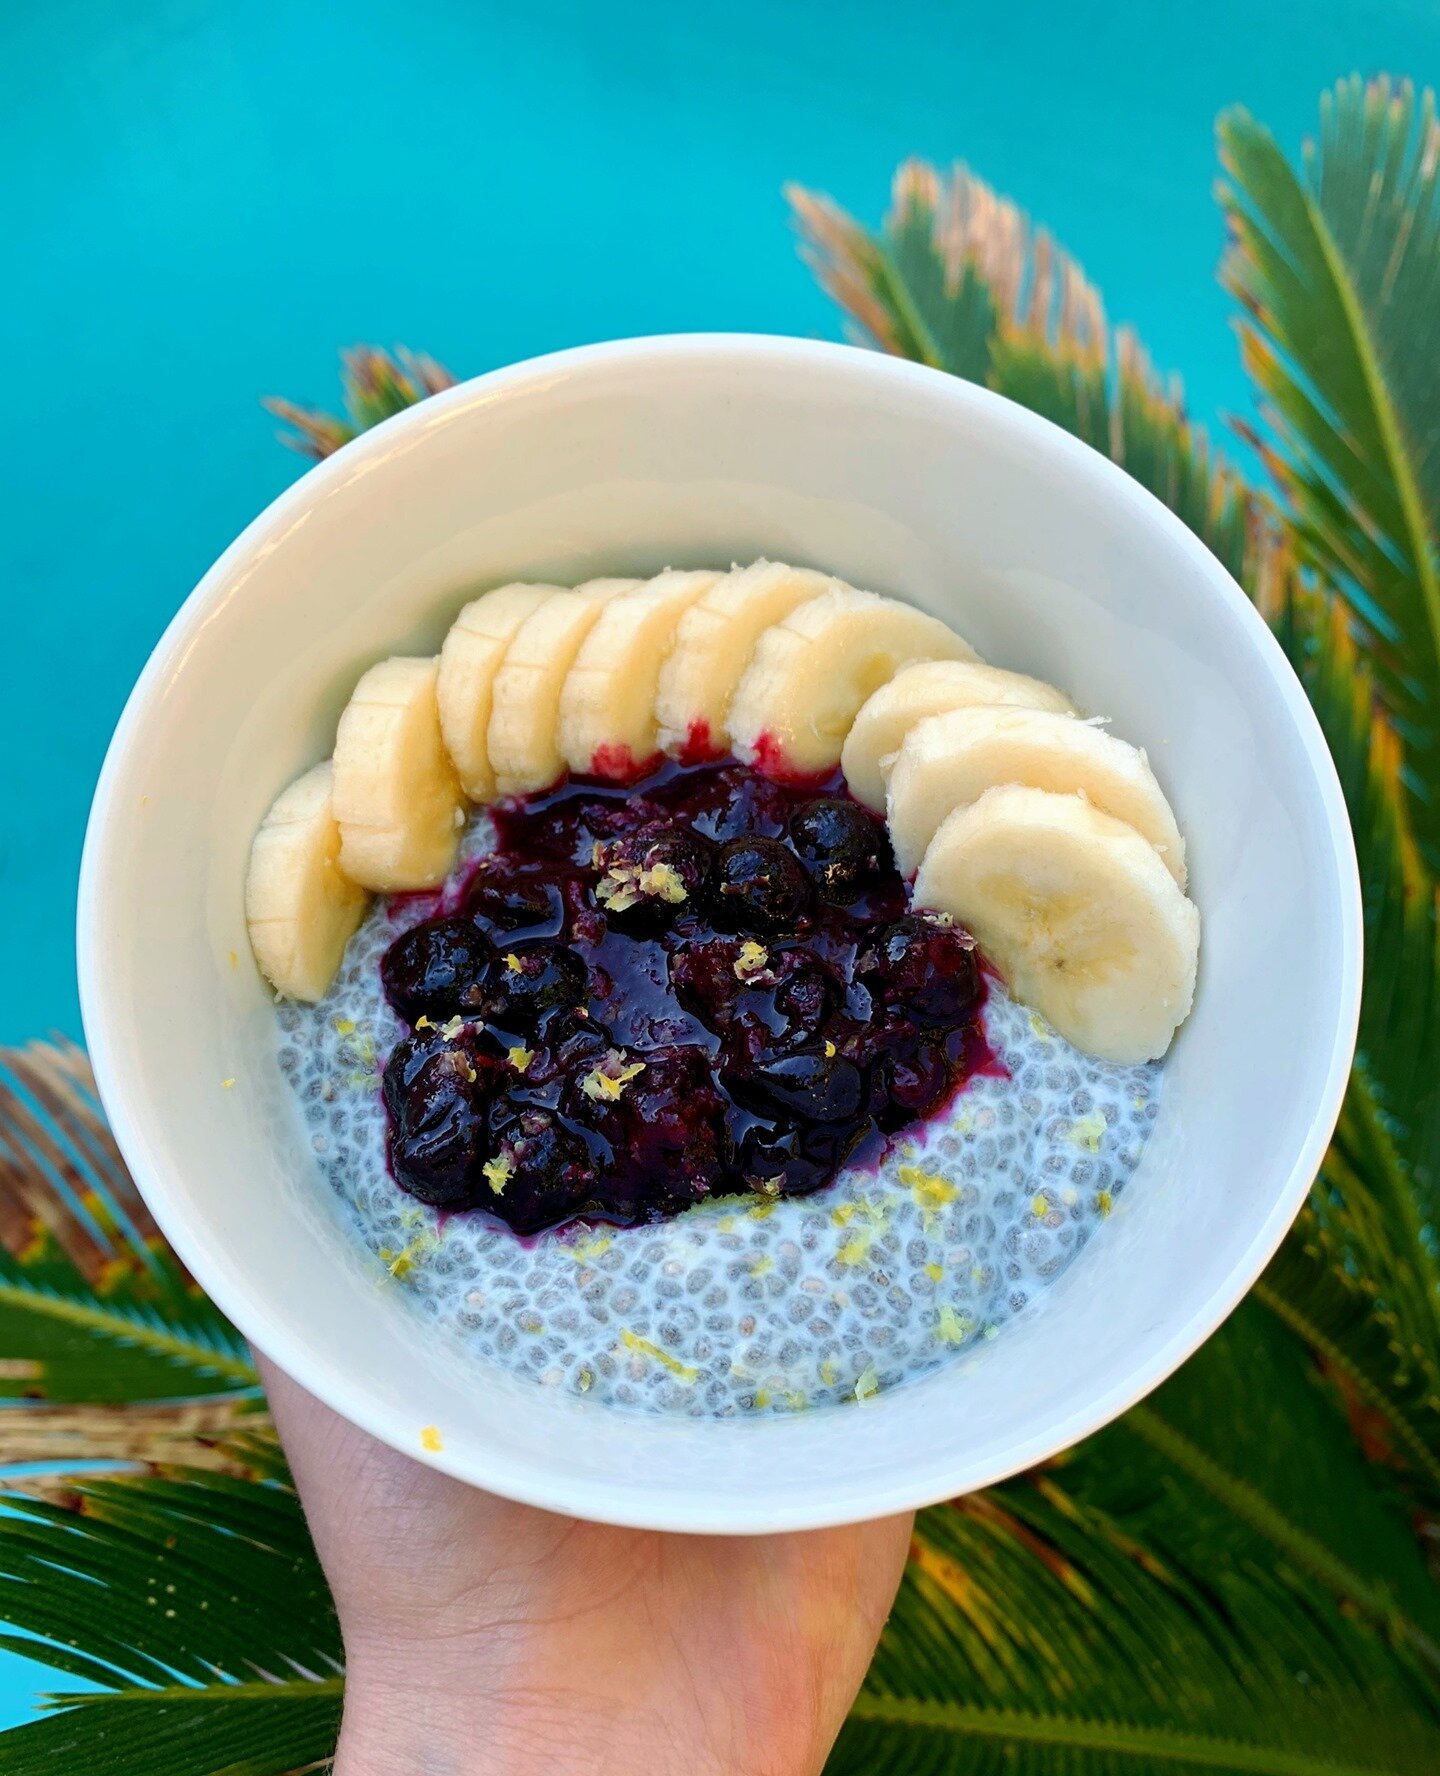 Lemon Coconut Chia Pudding with blueberry compote and chopped bananas. Recipe belowwww :) #eatsbylulu⁠
⁠
4 tablespoons chia pudding⁠
2 tablespoons plain coconut yogurt⁠
1 cup almond milk ⁠
1 tablespoon lemon zest⁠
⁠
- mix ingredients all together in 